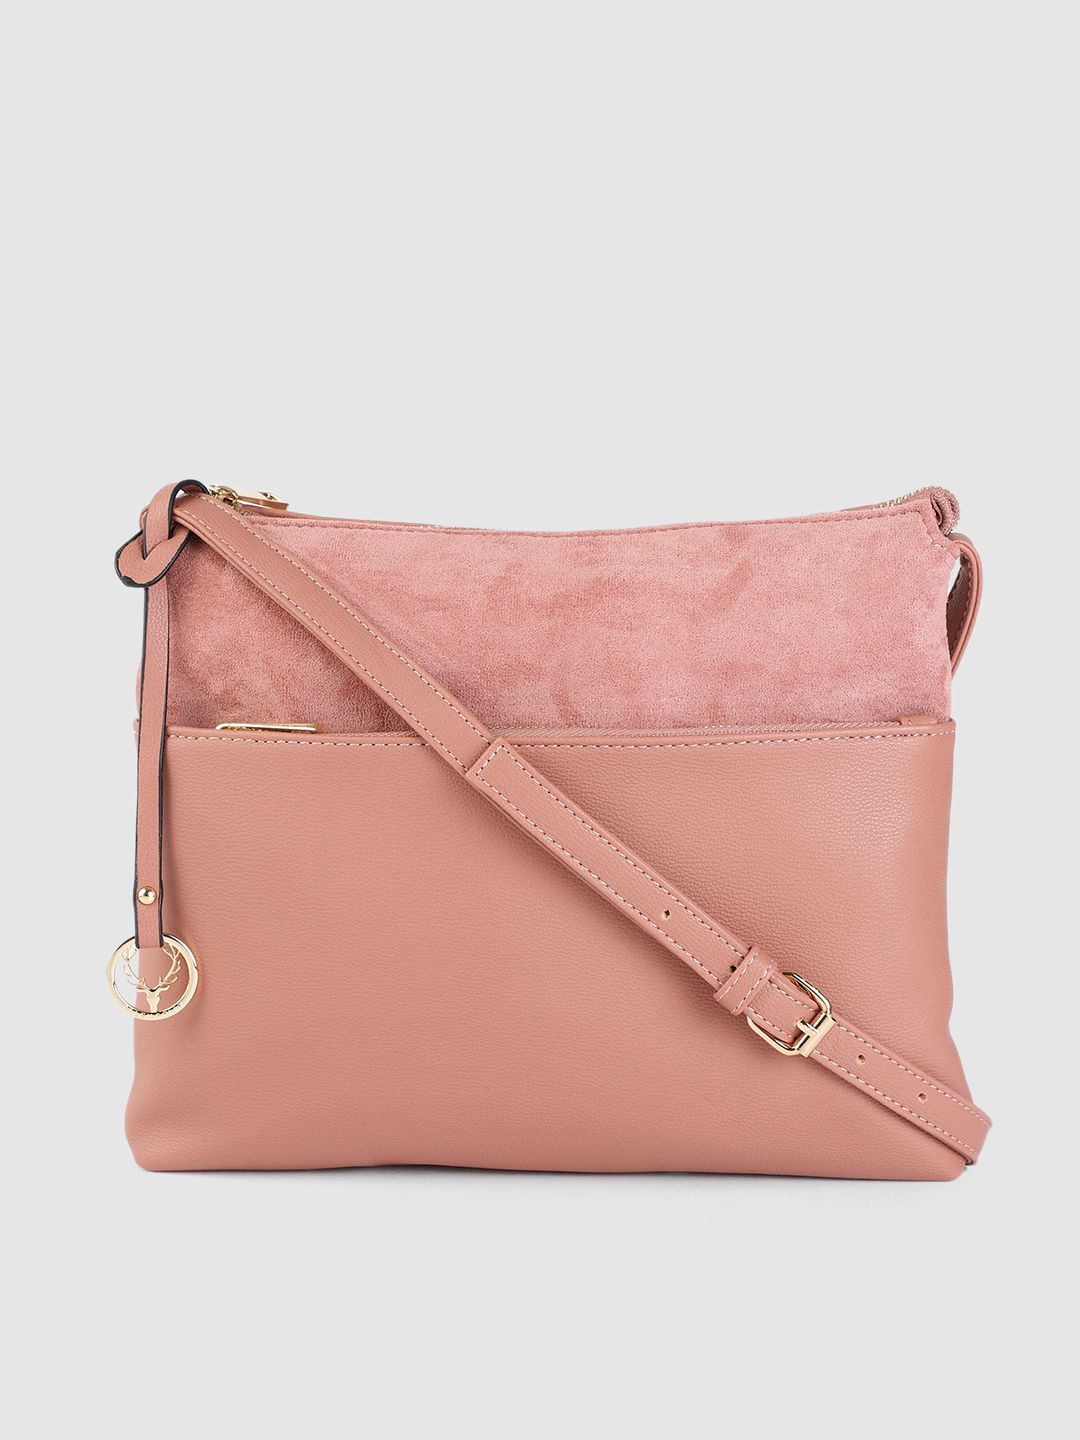 Allen Solly Women  Rose Textured PU Structured Sling Bag Price in India